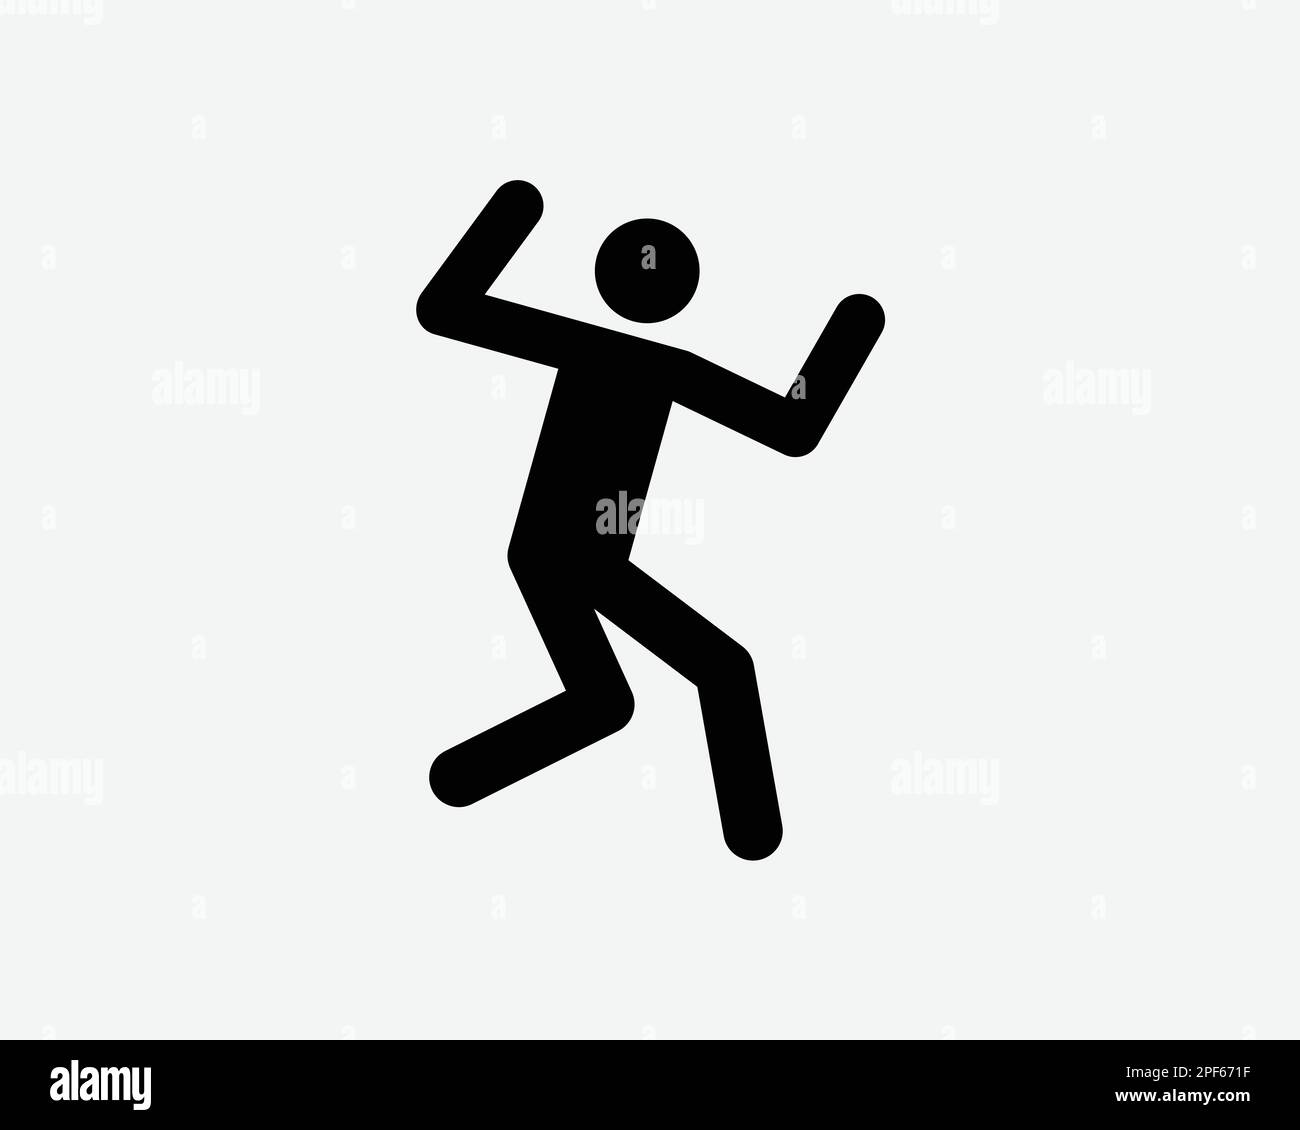 Man Jumping Icon Jump Jumper Happy Joy Leap Leaping Vector Black White Silhouette Symbol Sign Graphic Clipart Artwork Illustration Pictogram Stock Vector